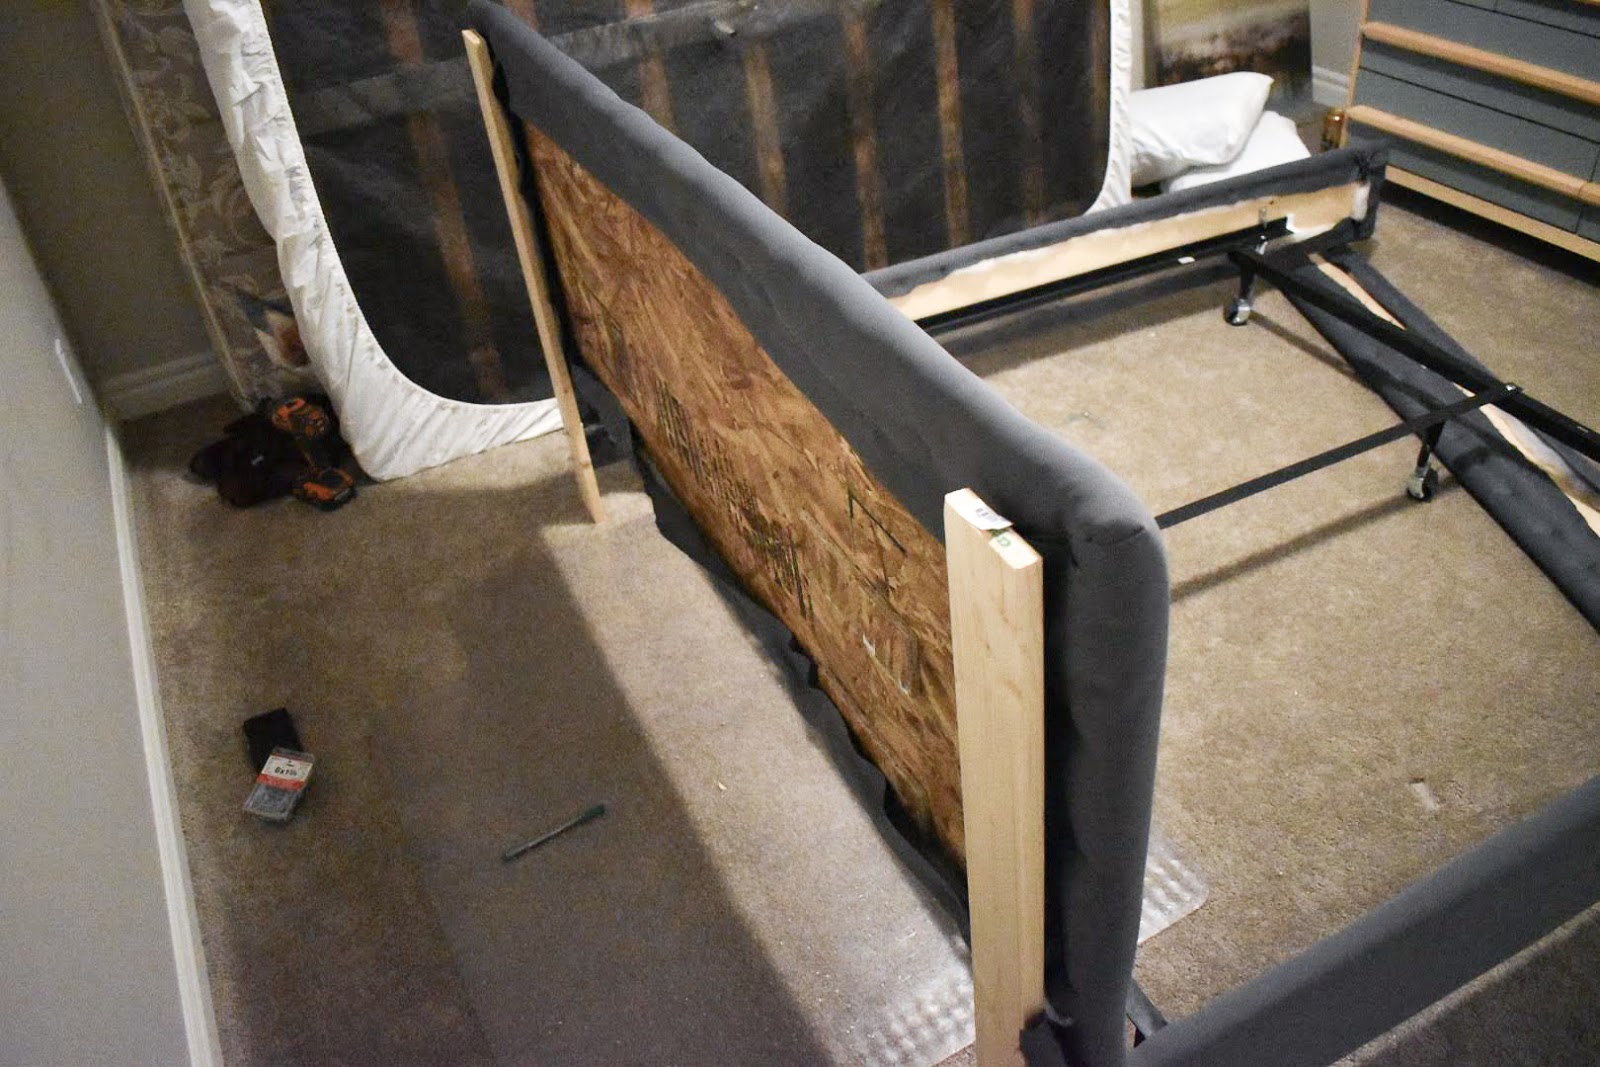 Metal Bed Frame Into An Upholstered, Can You Attach A Wood Headboard To Metal Frame